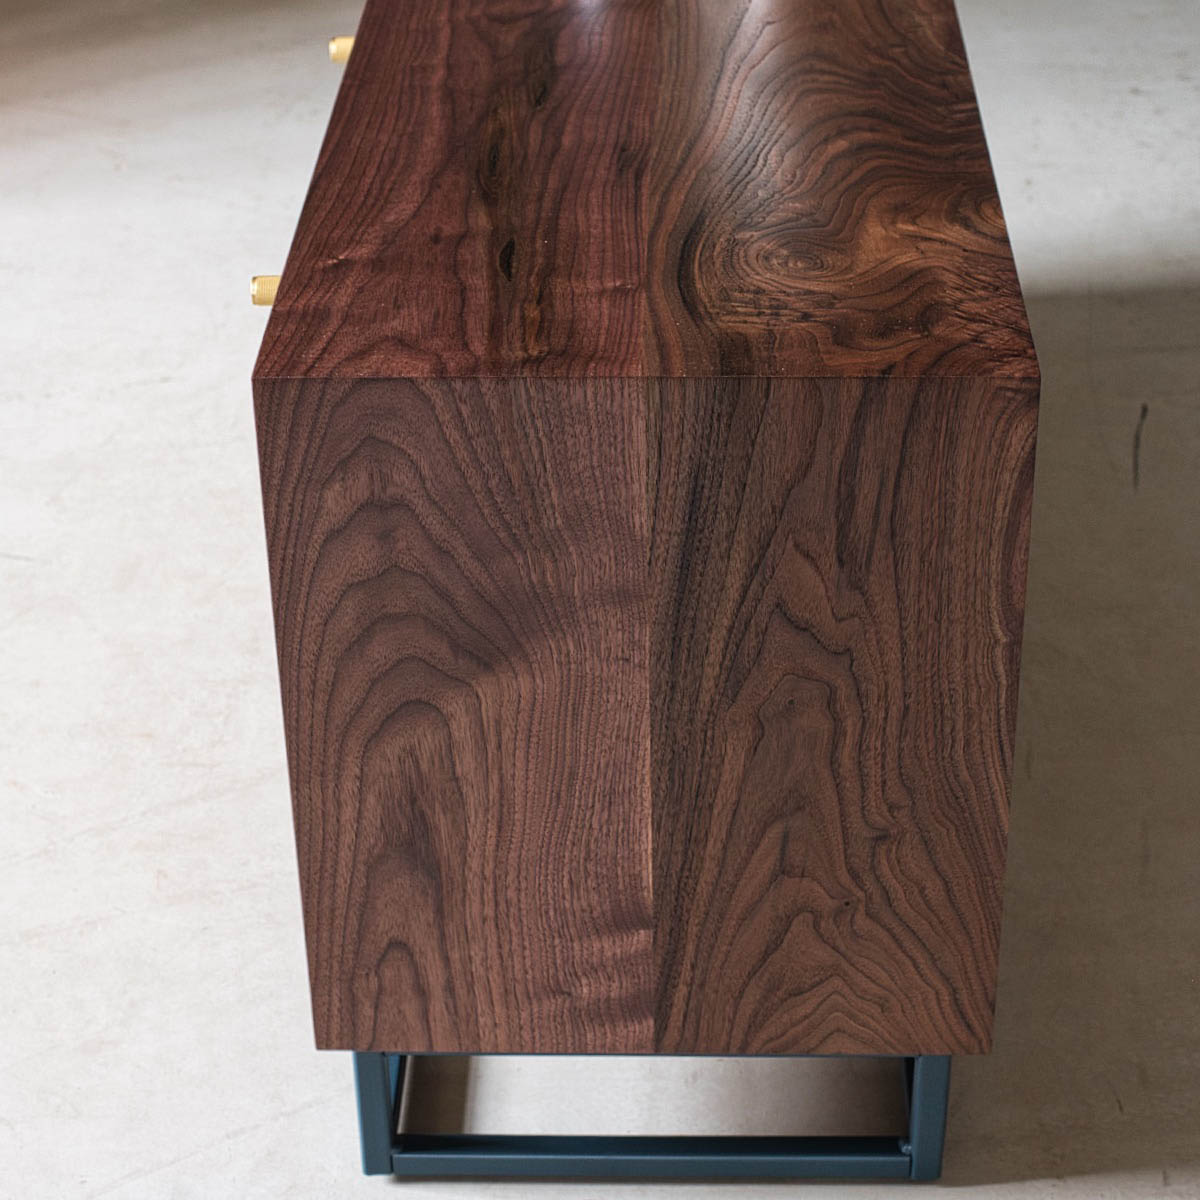 An image of the Walnut Media Cabinet, Aeris product available from Koda Studios